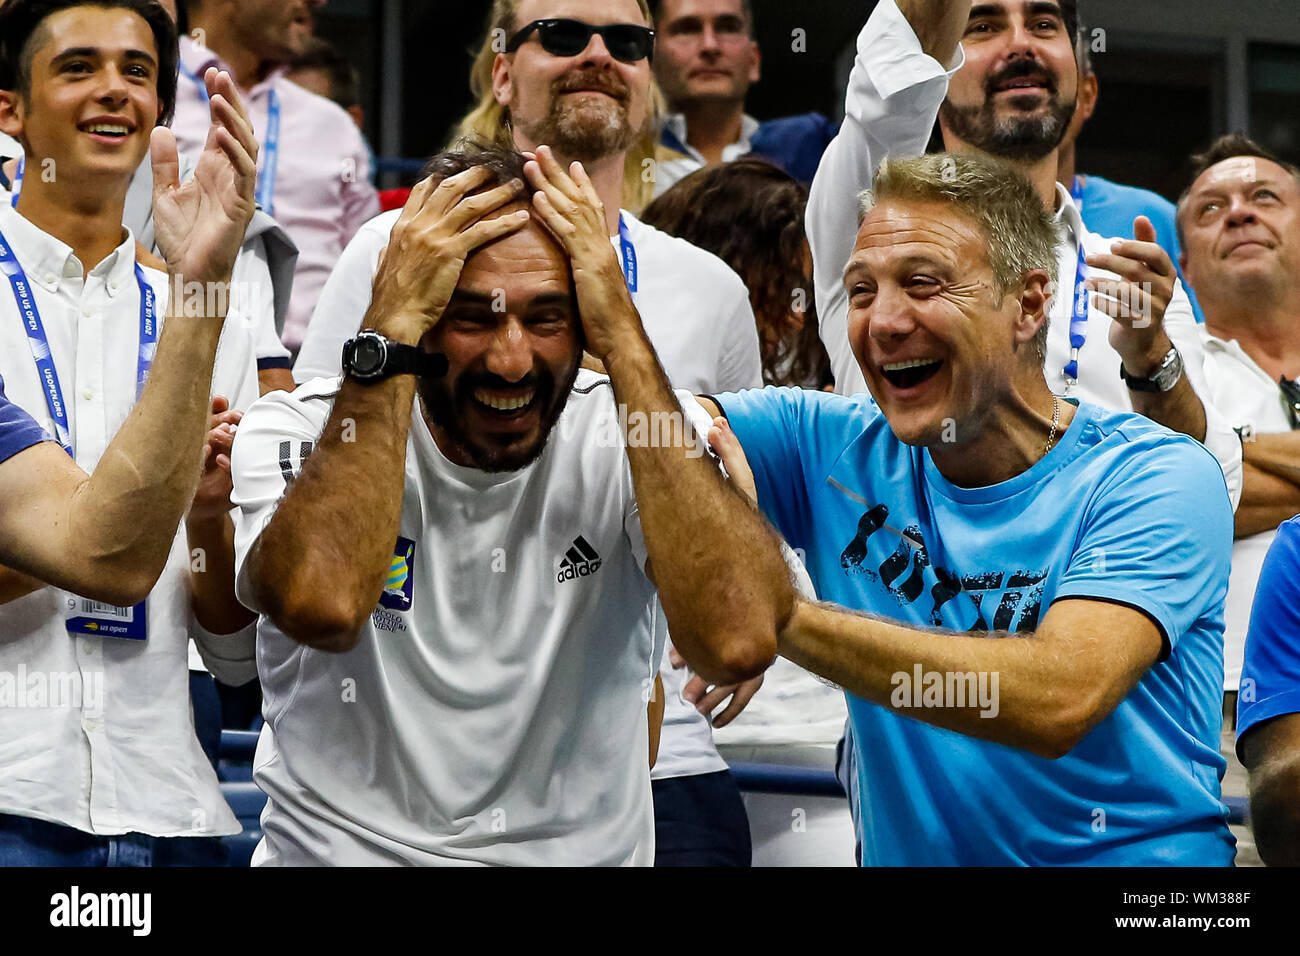 New York, USA. 04th Sep, 2019. Vincenzo Santopadre, Matteo Berrettini's  coach, celebrates the win of Matteo Berretini of Italy against Gael Monfils  of France with a score of3-6, 6-3, 6-2, 3-6, 7-6